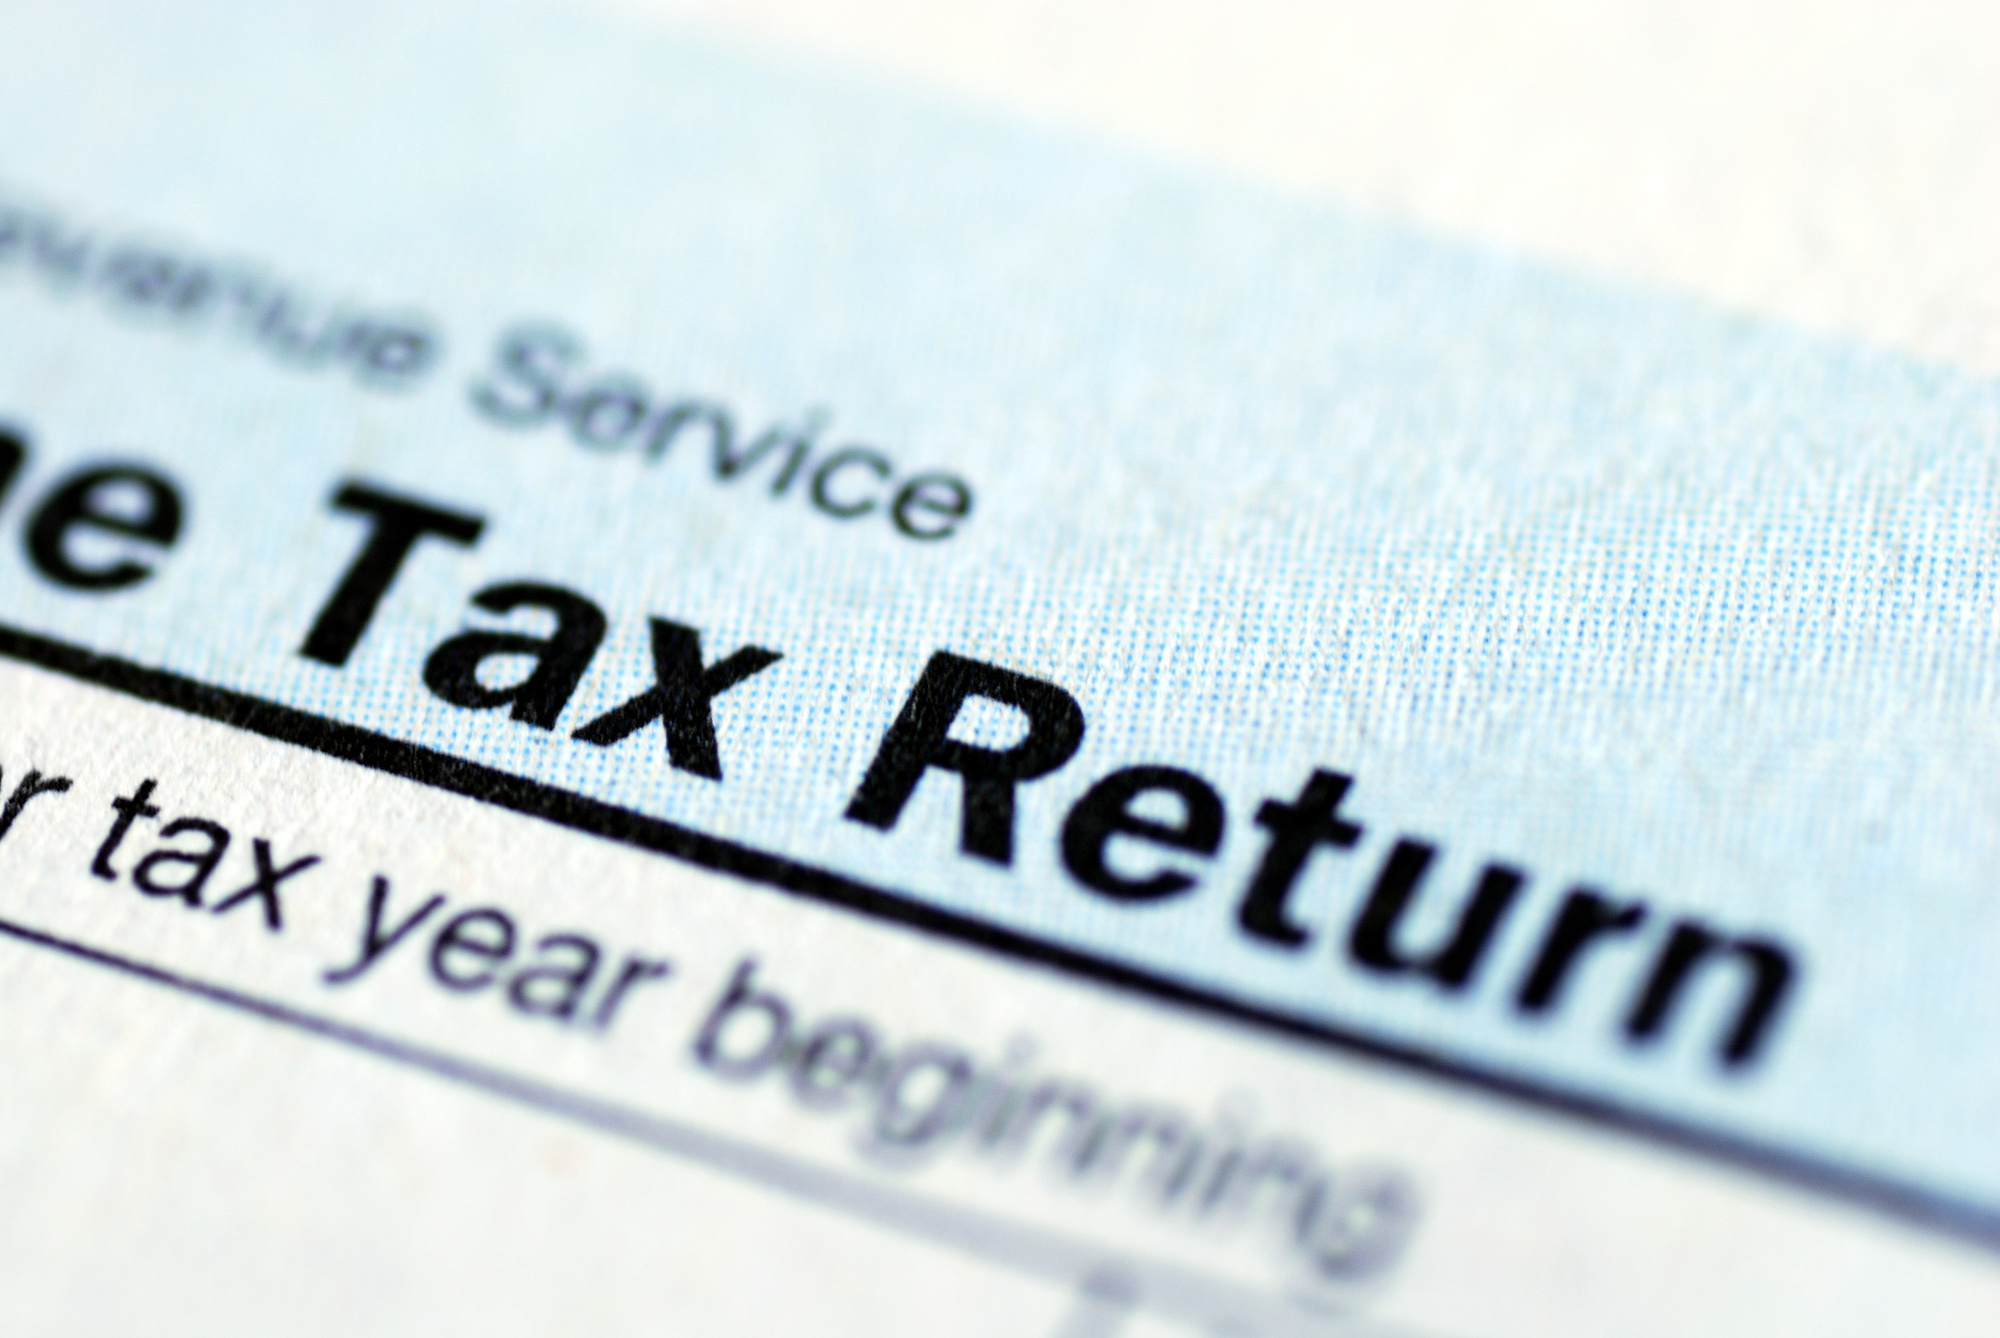 Learn How to Get a Bigger Tax Refund with These 7 Tips